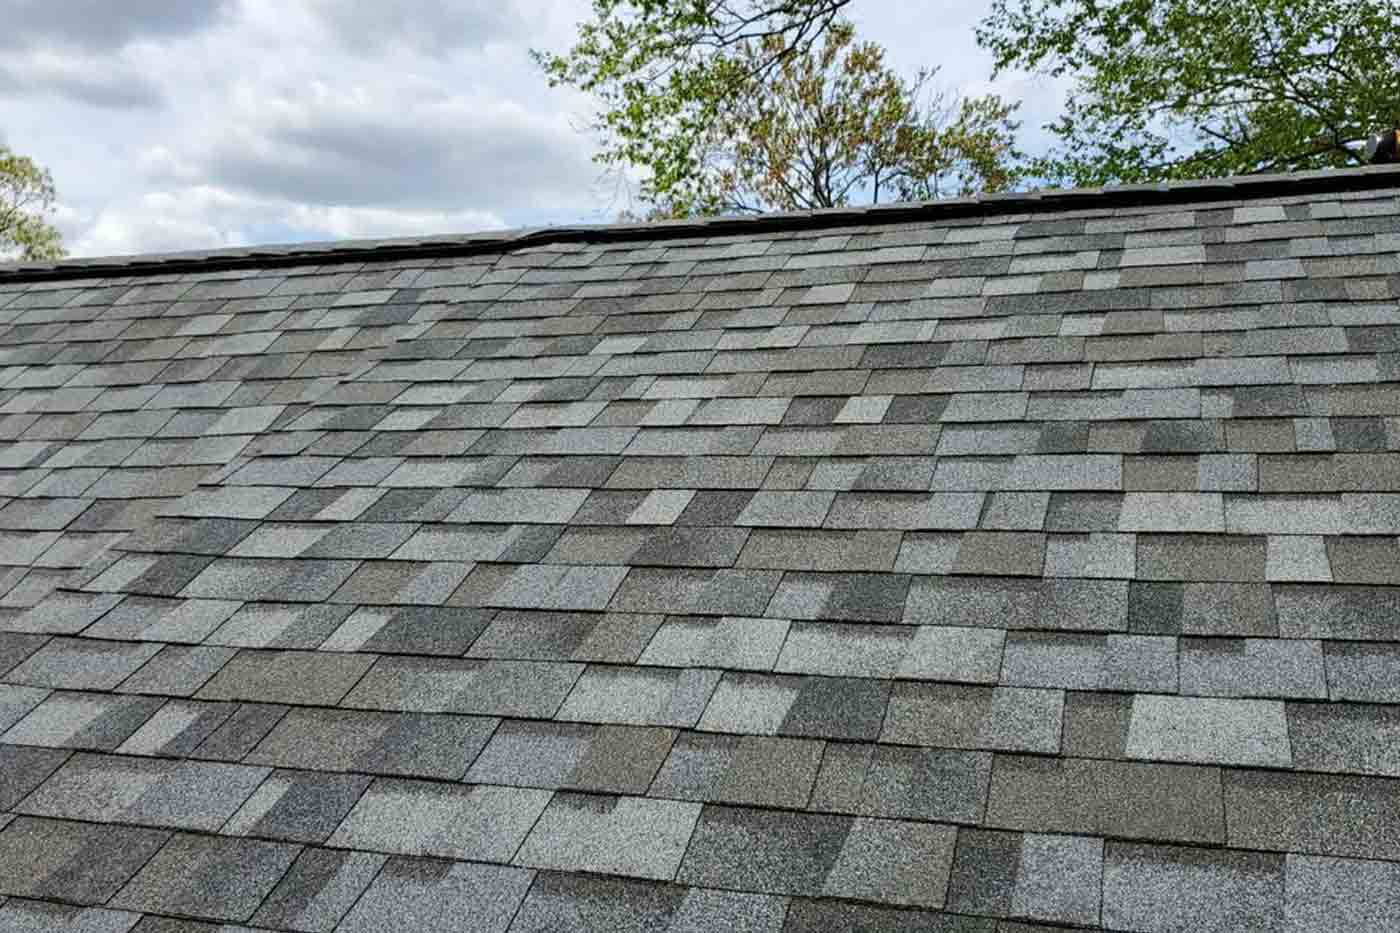 Find a roof repair company near you